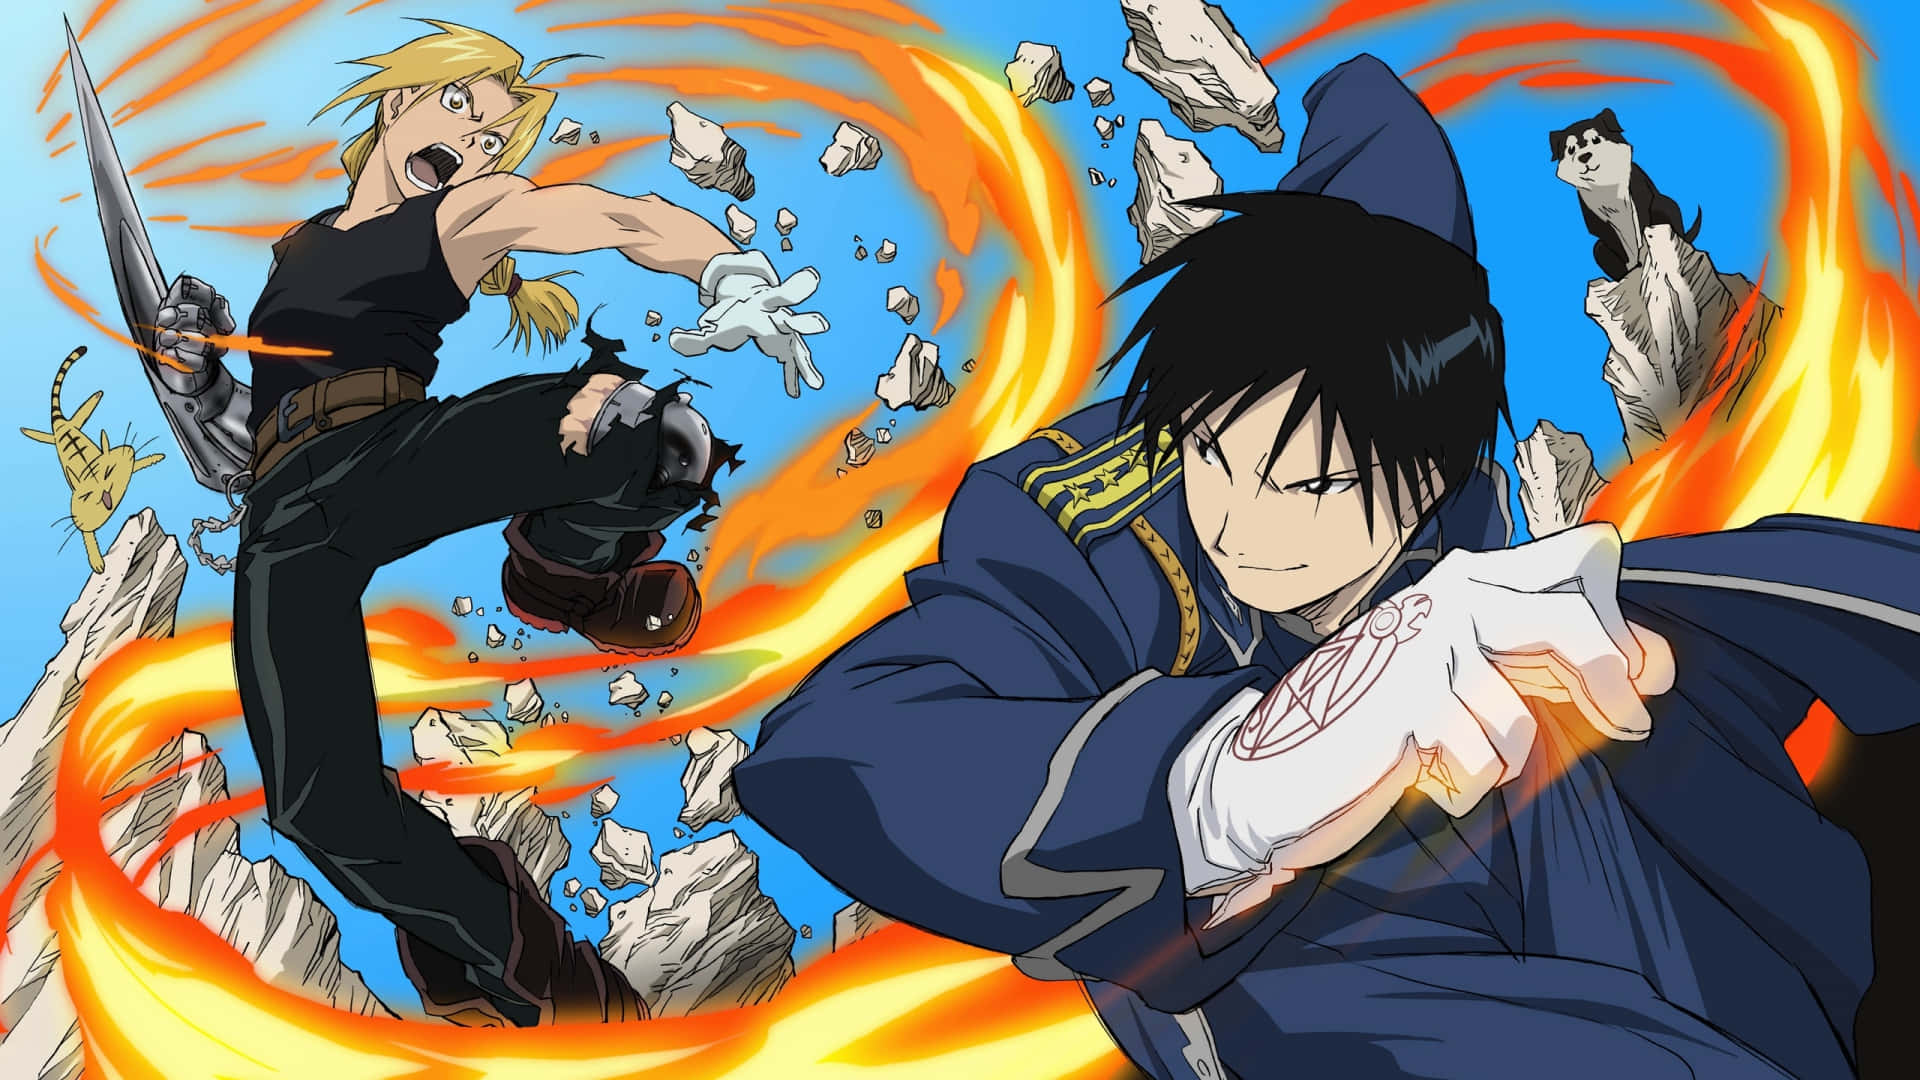 Two warriors duke it out in an anime-style battle!